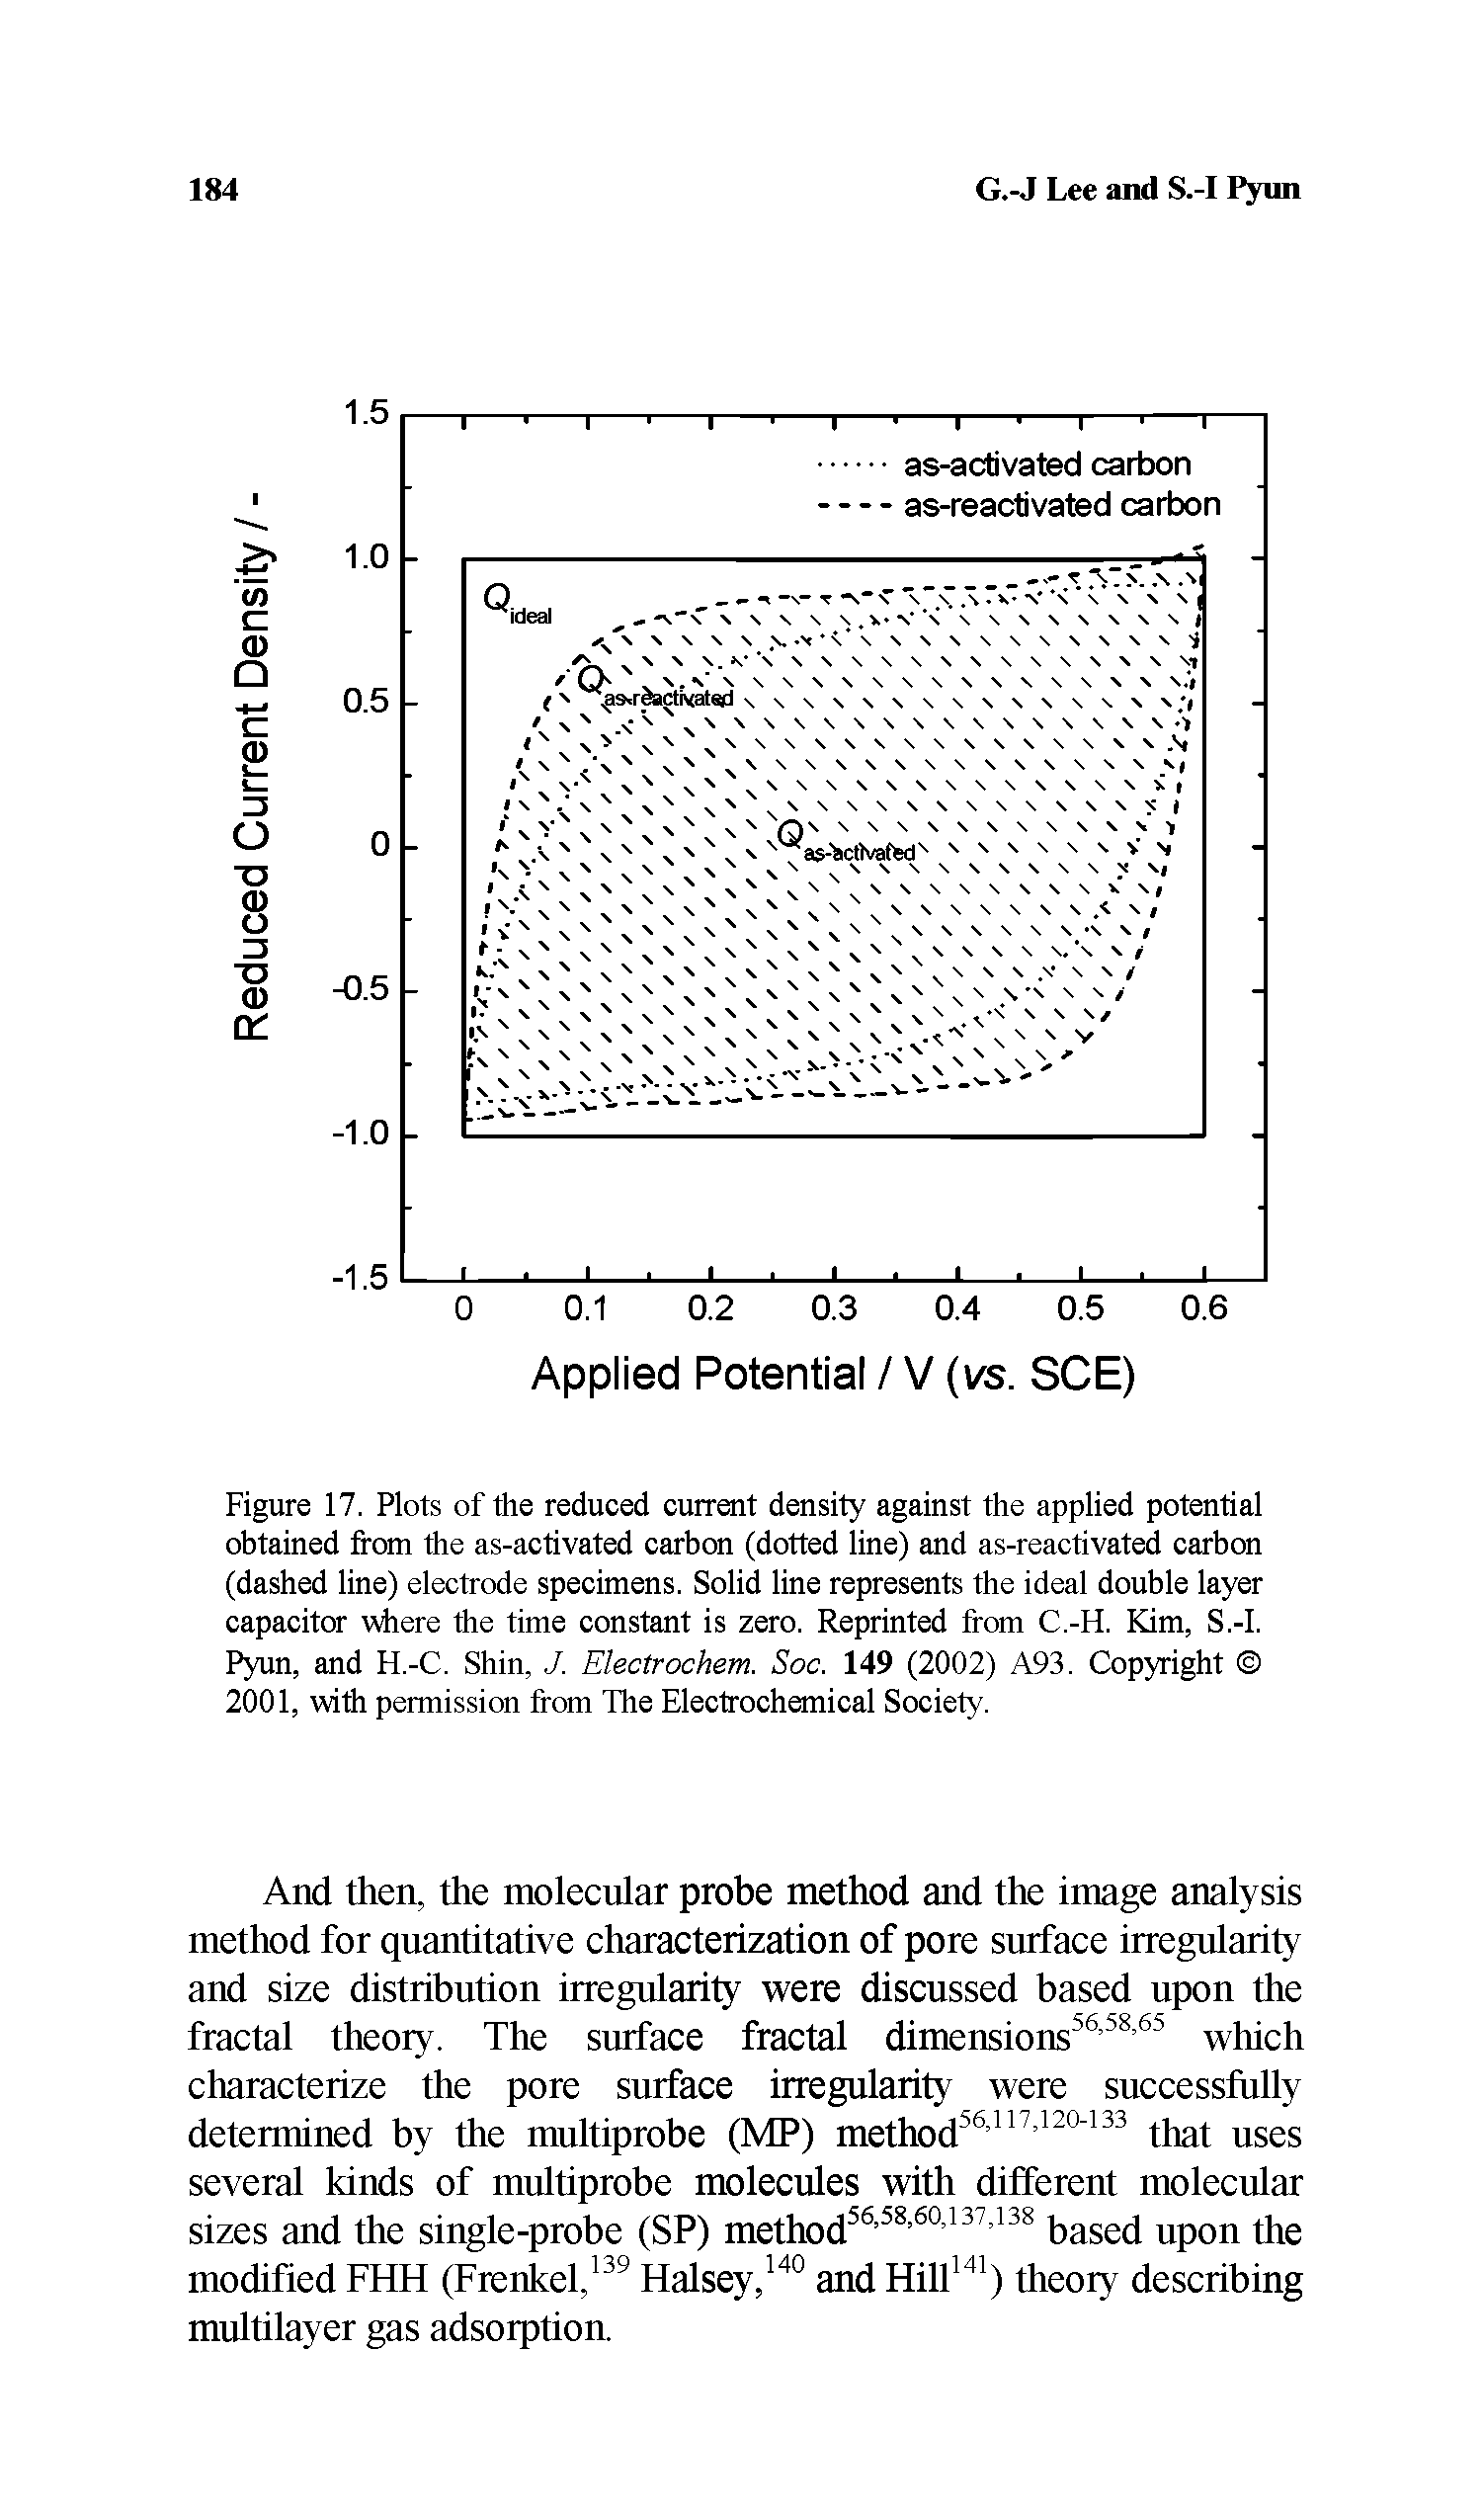 Figure 17. Plots of the reduced current density against the applied potential obtained from the as-activated carbon (dotted line) and as-reactivated carbon (dashed line) electrode specimens. Solid line represents the ideal double layer capacitor where the time constant is zero. Reprinted from C.-H. Kim, S.-I. Pyun, and H.-C. Shin, J. Electrochem. Soc. 149 (2002) A93. Copyright 2001, with permission from The Electrochemical Society.